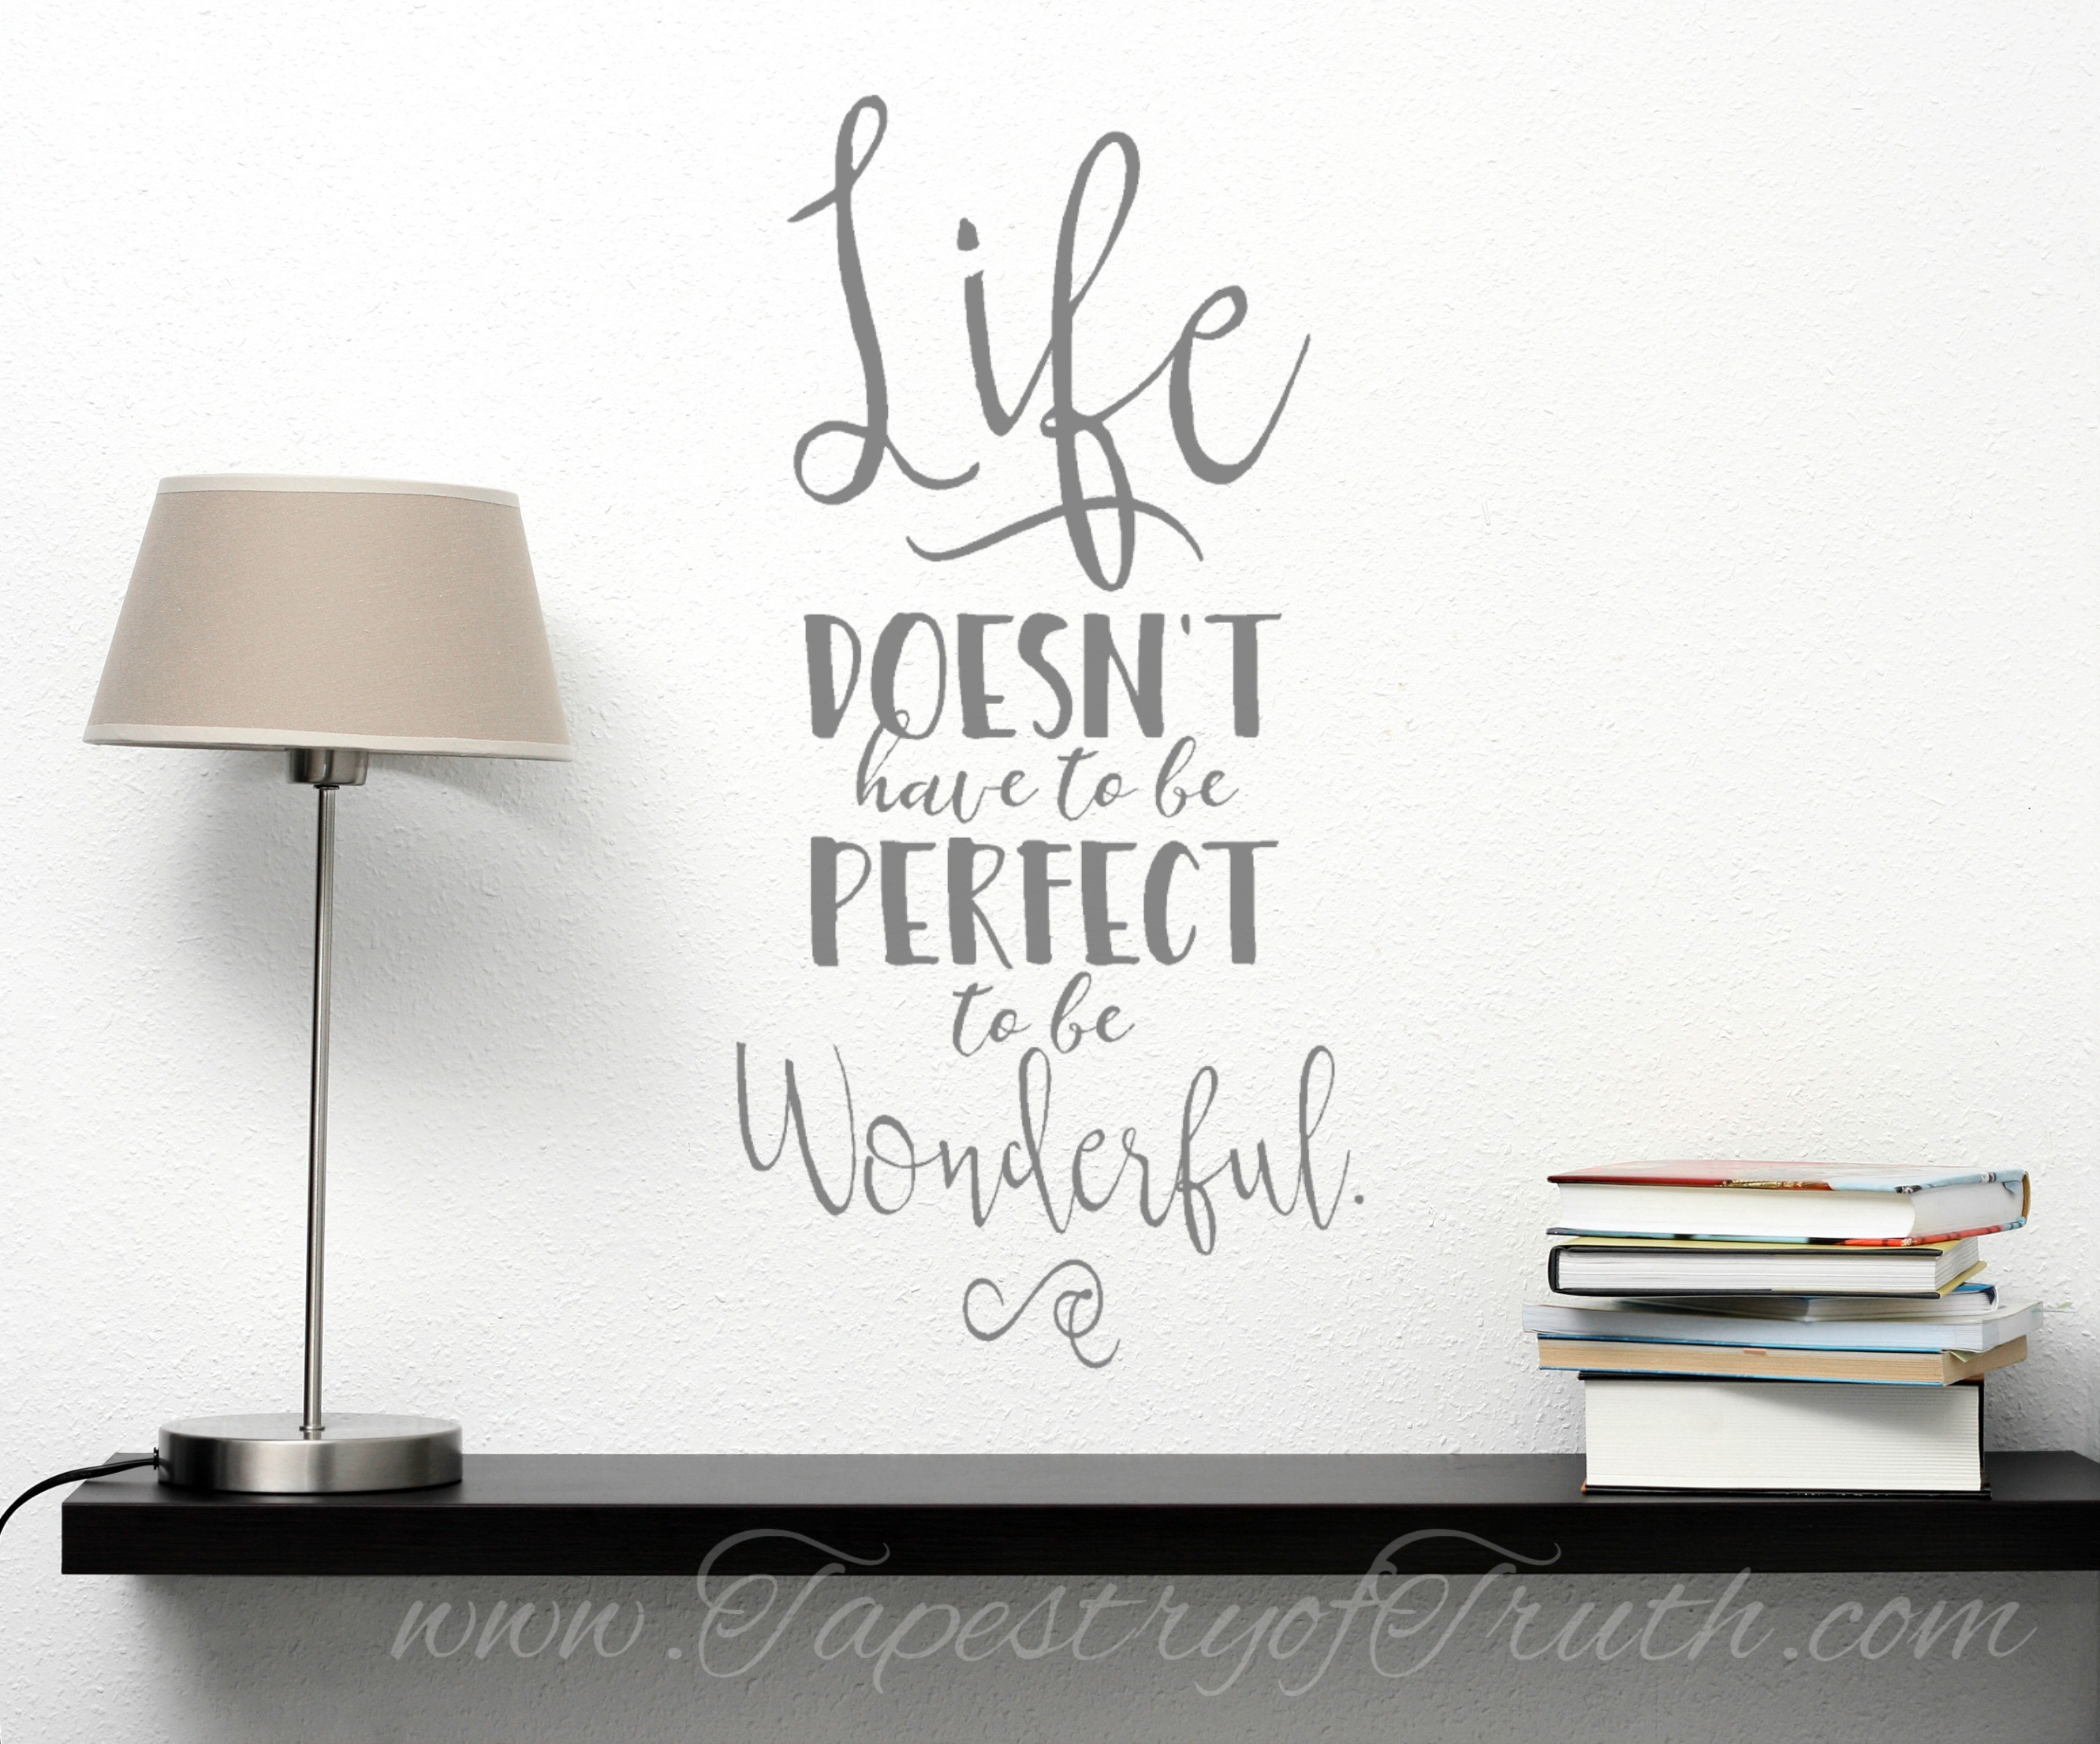 Life doesn't have to be perfect to be wonderful!